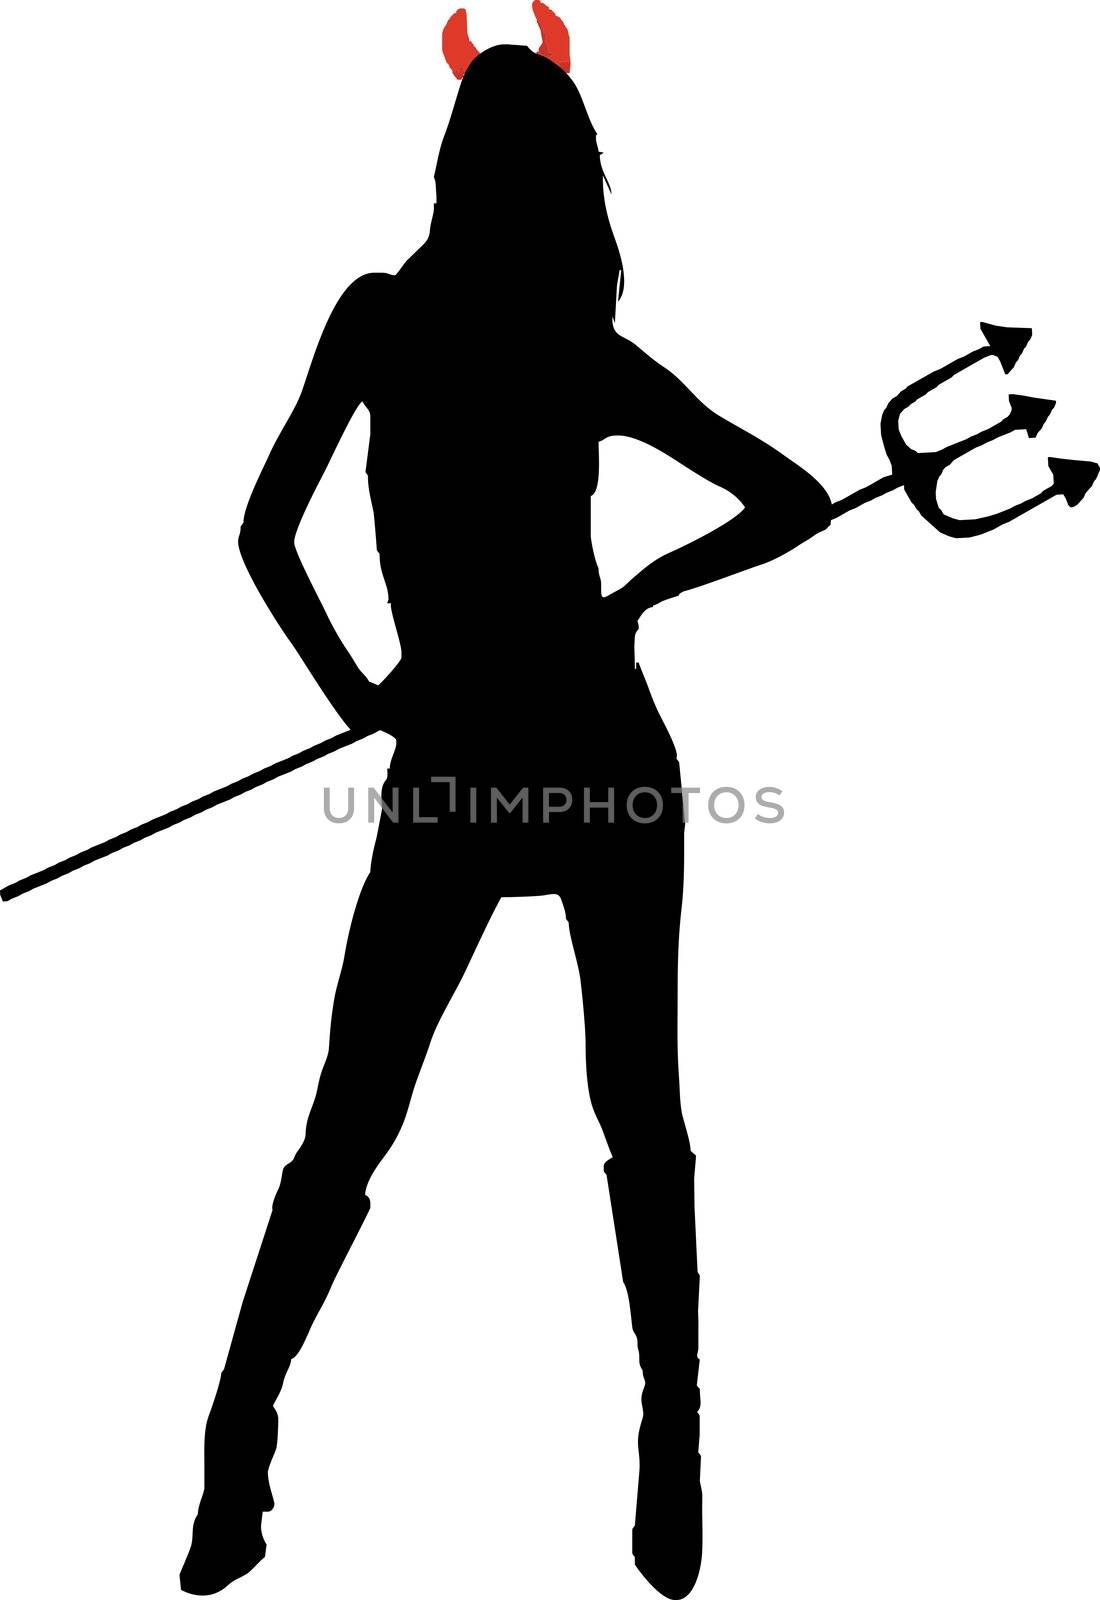 Sexy she-devil with trident - isolated vector illustration